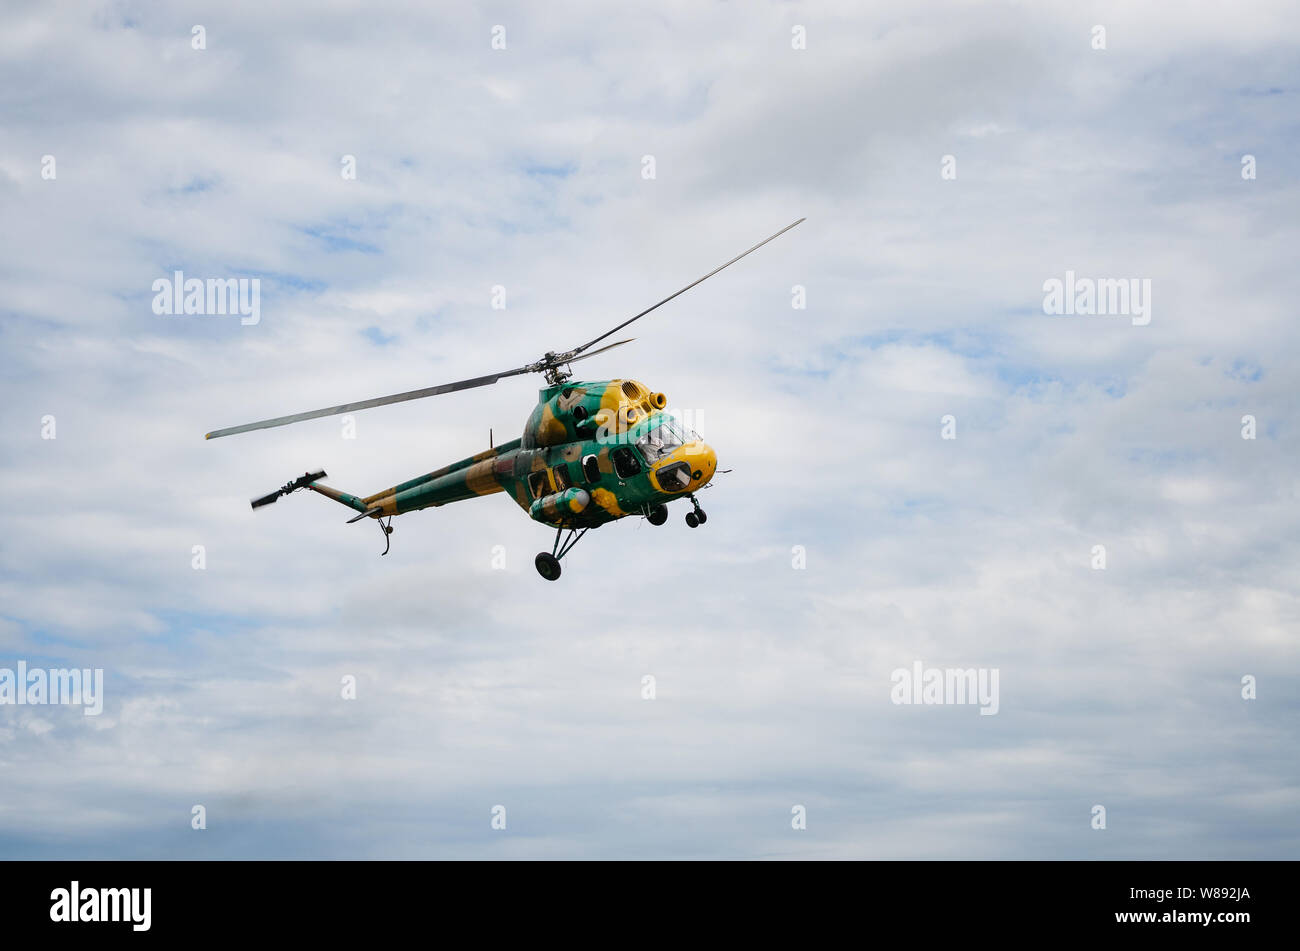 Khaki colored helicopter is flying in blue sky Stock Photo